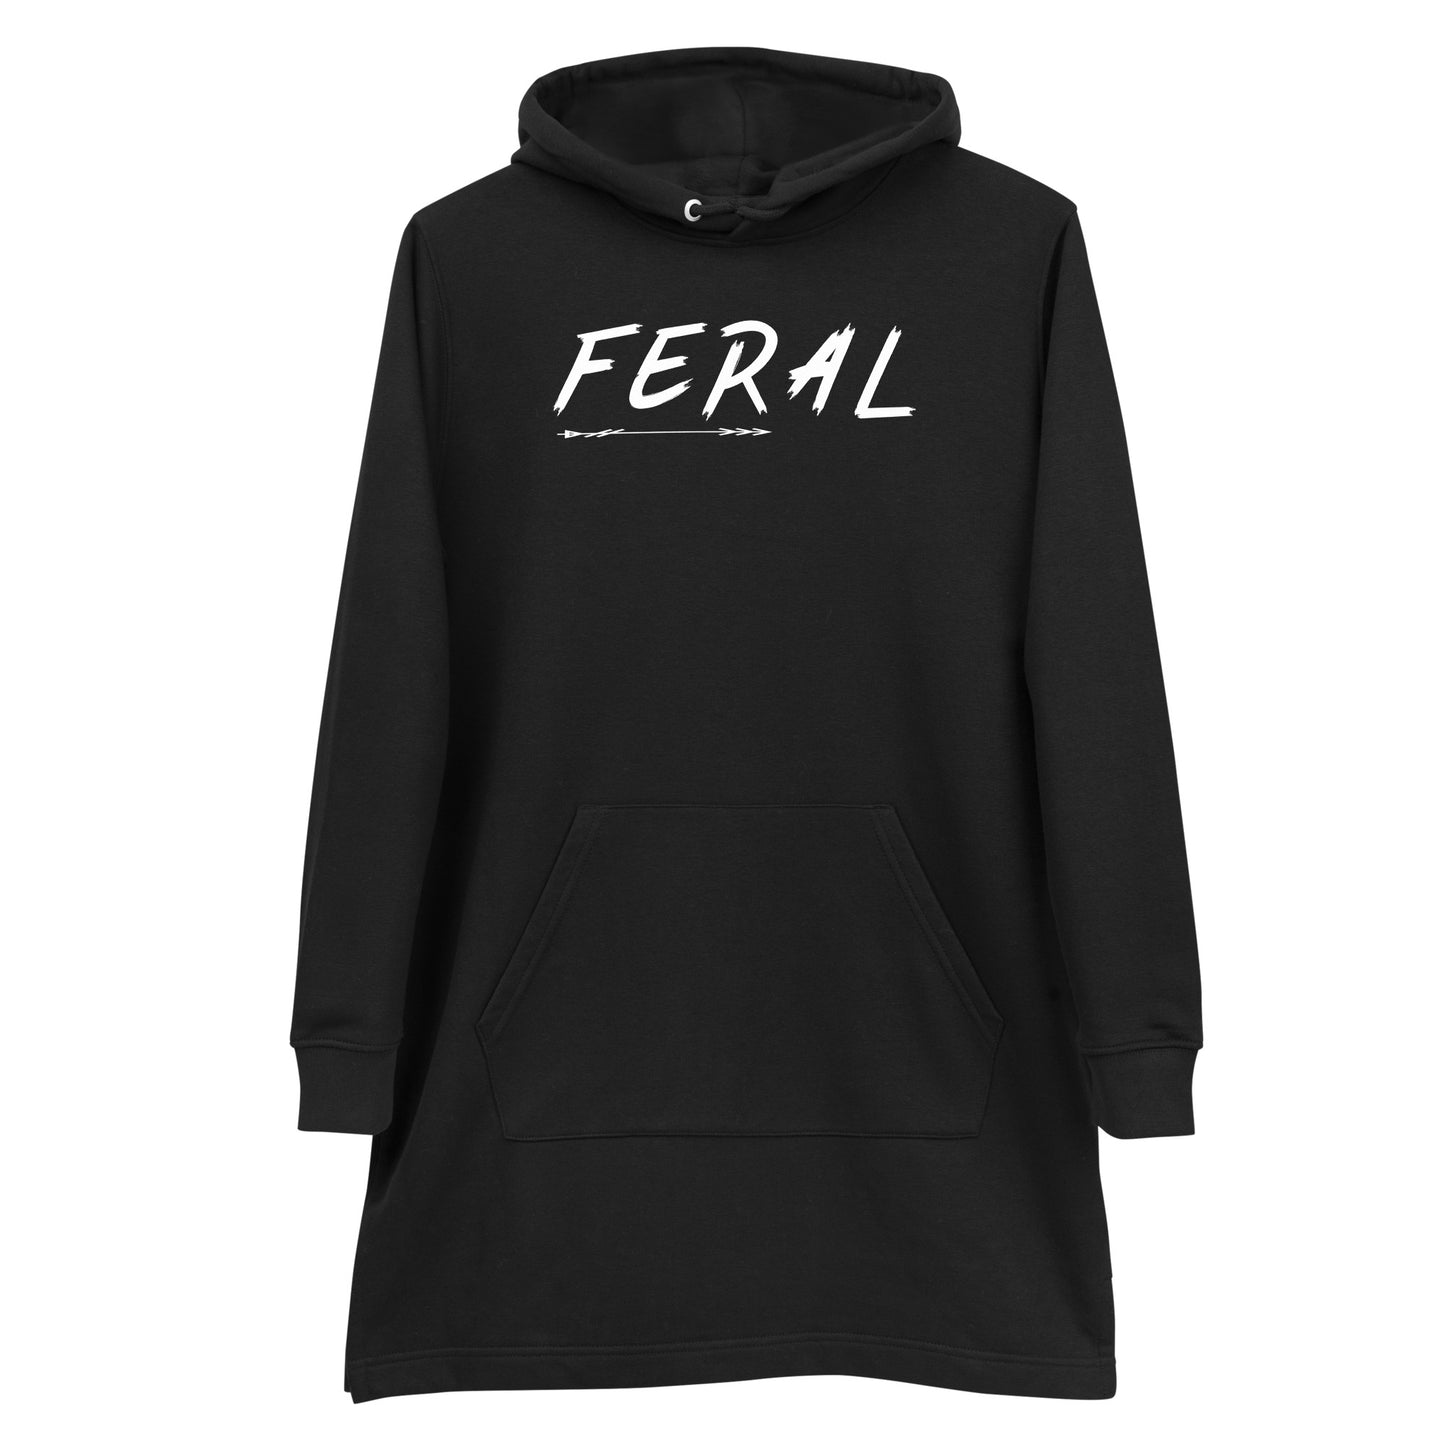 Feral - Hoodie Dress w Text on Front